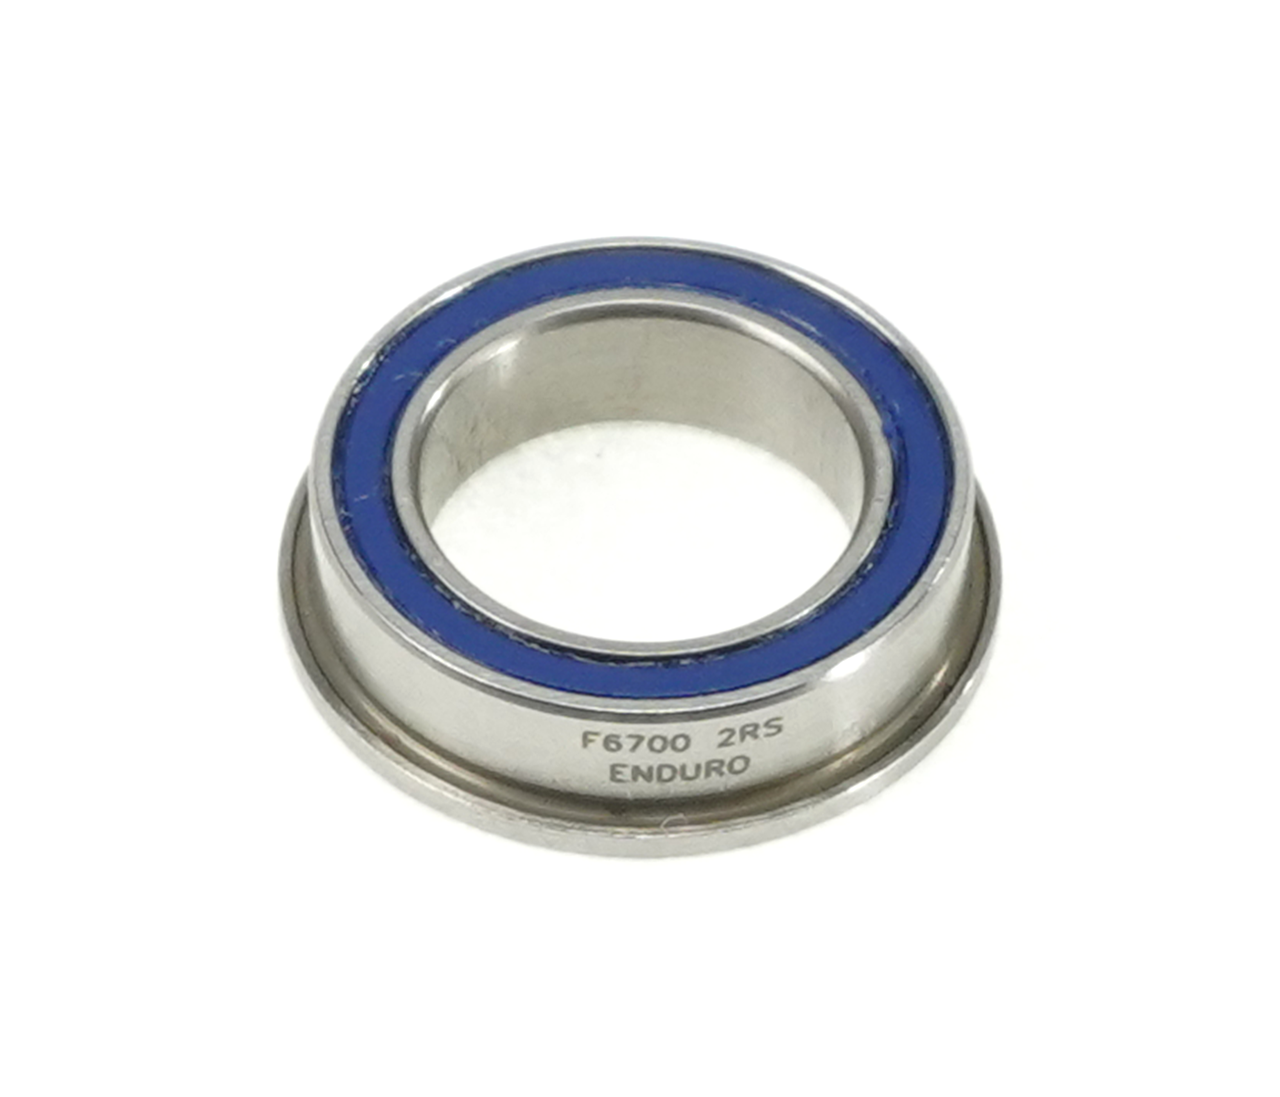 Enduro F6700 2RS - ABEC-3, Flanged, Radial Bearing (C3 Clearance) - 10mm x 15/16mm x 4mm